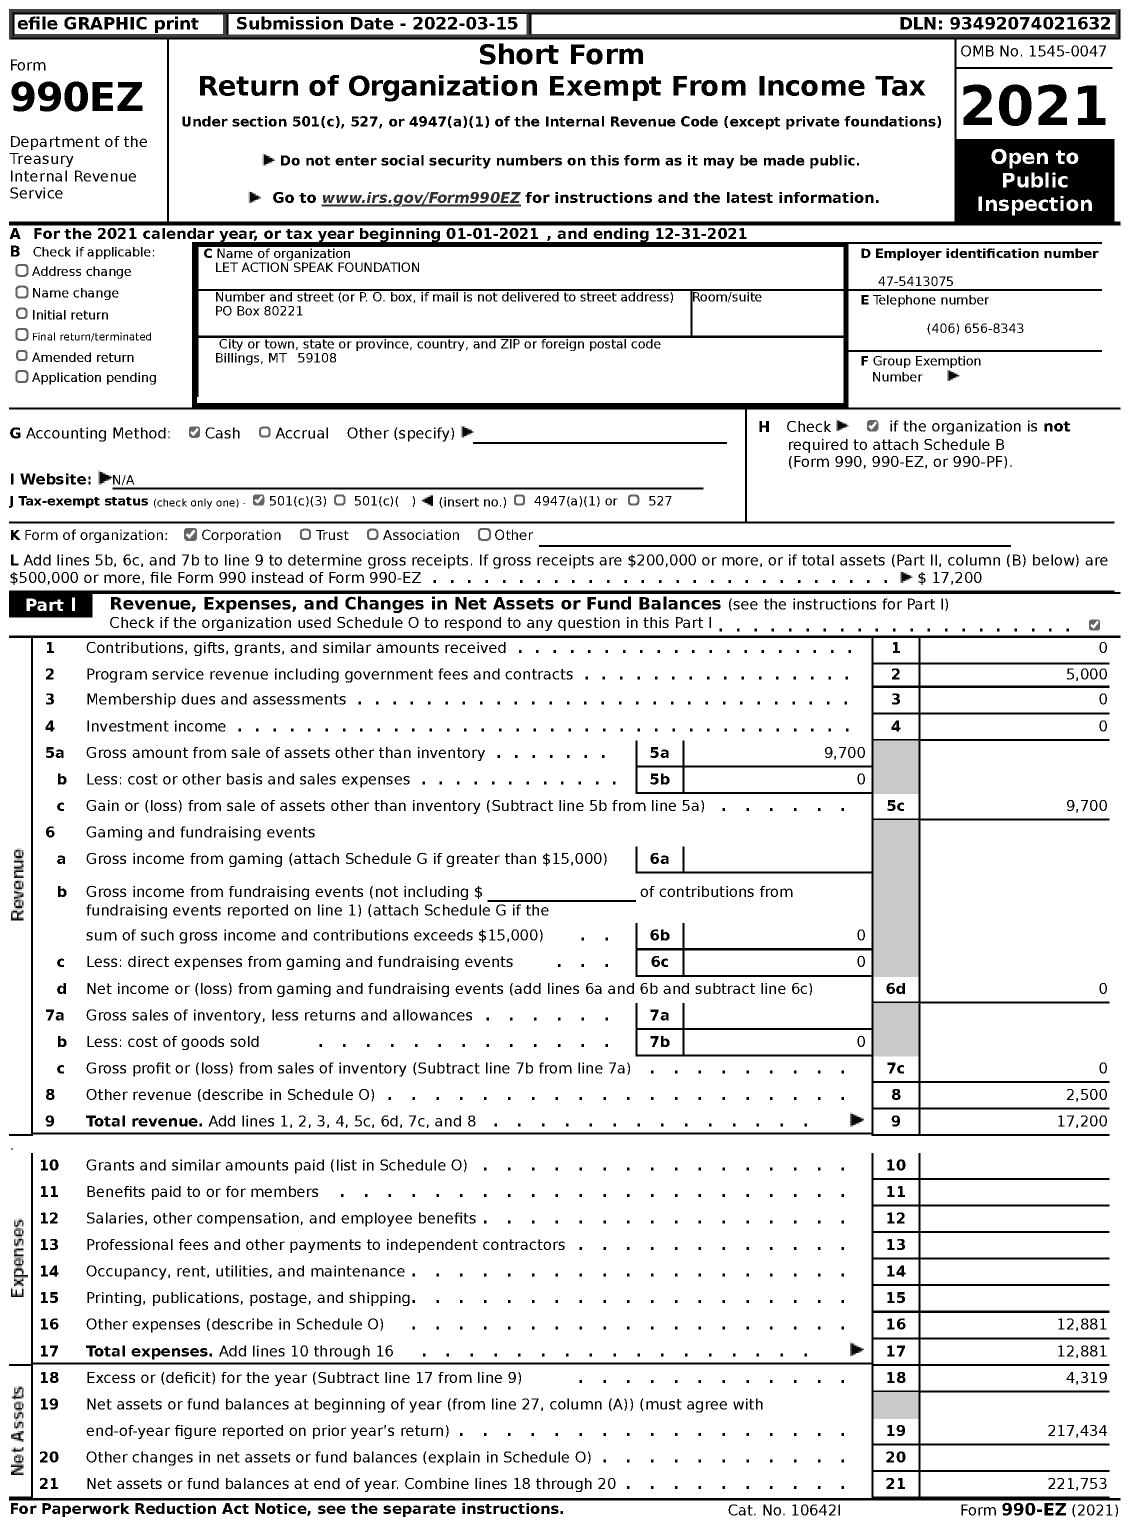 Image of first page of 2021 Form 990EZ for Let Action Speak Foundation